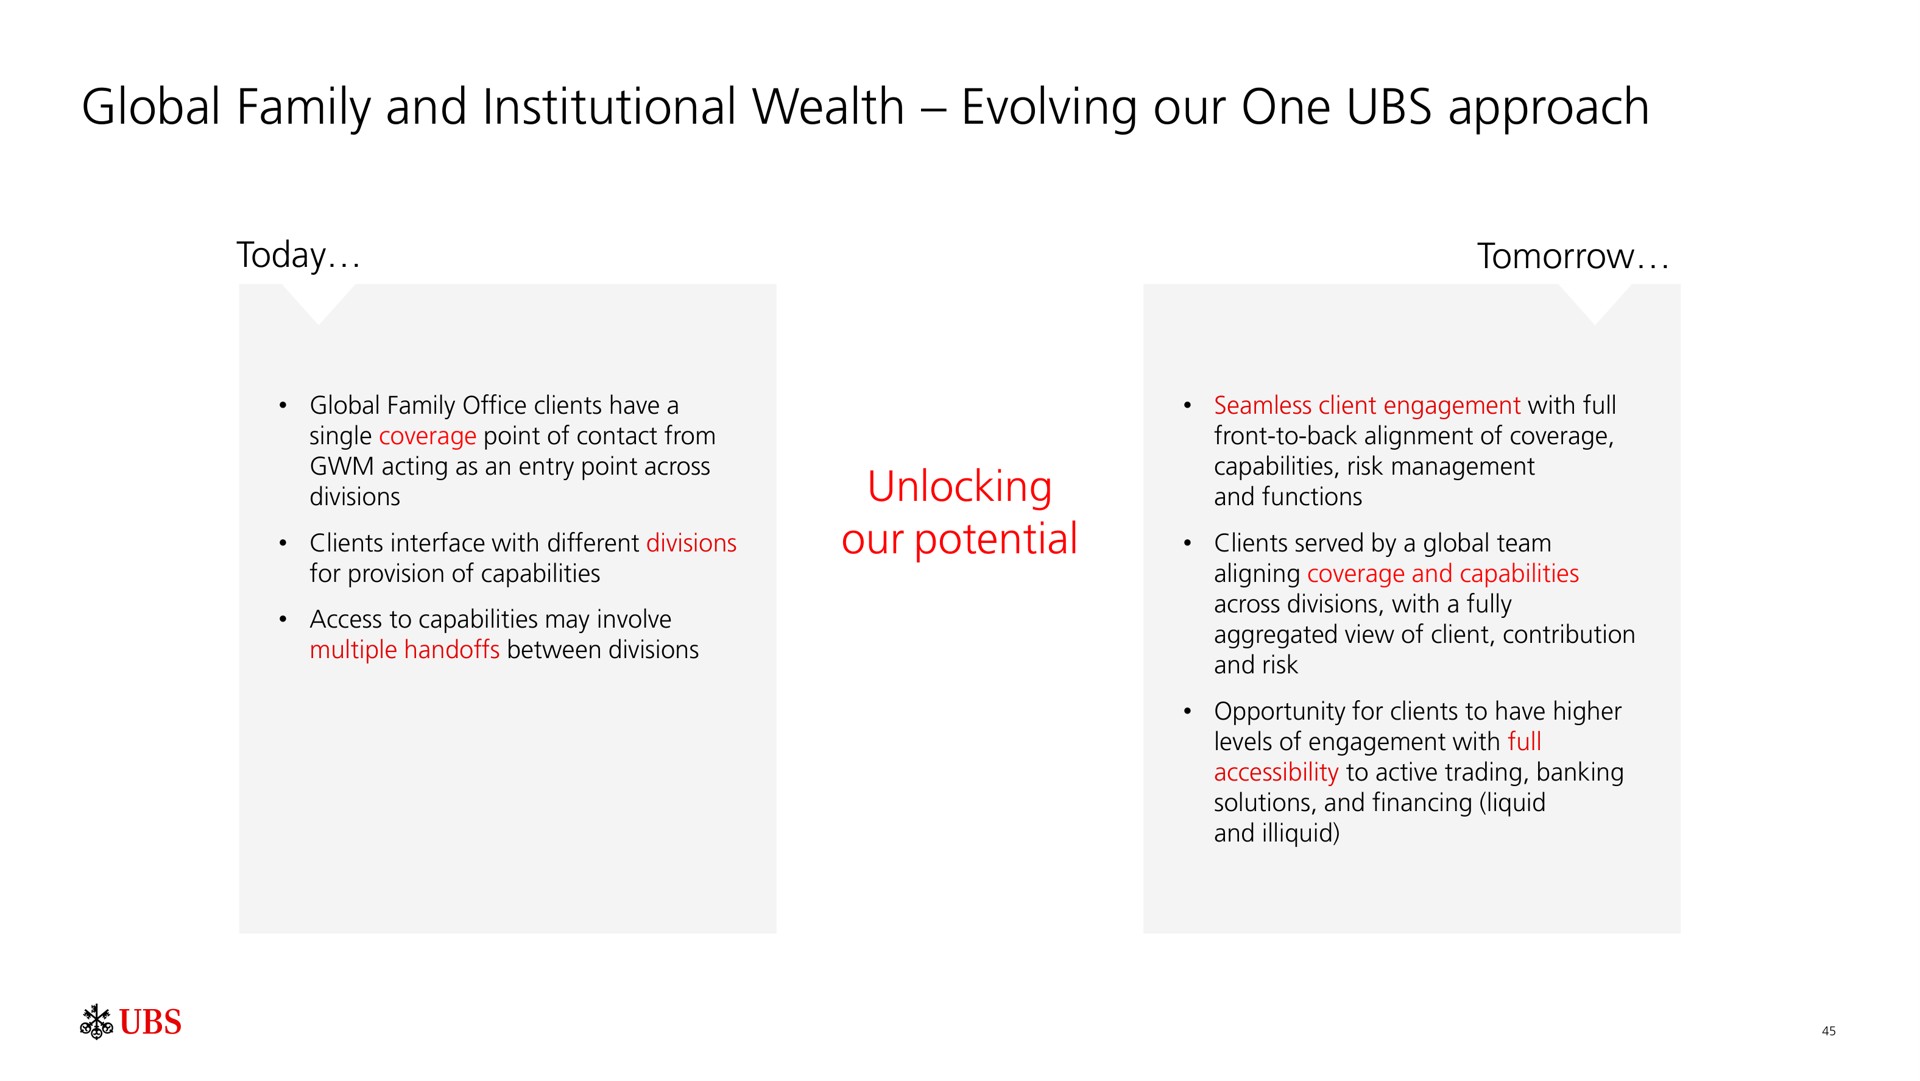 global family and institutional wealth evolving our one approach | UBS